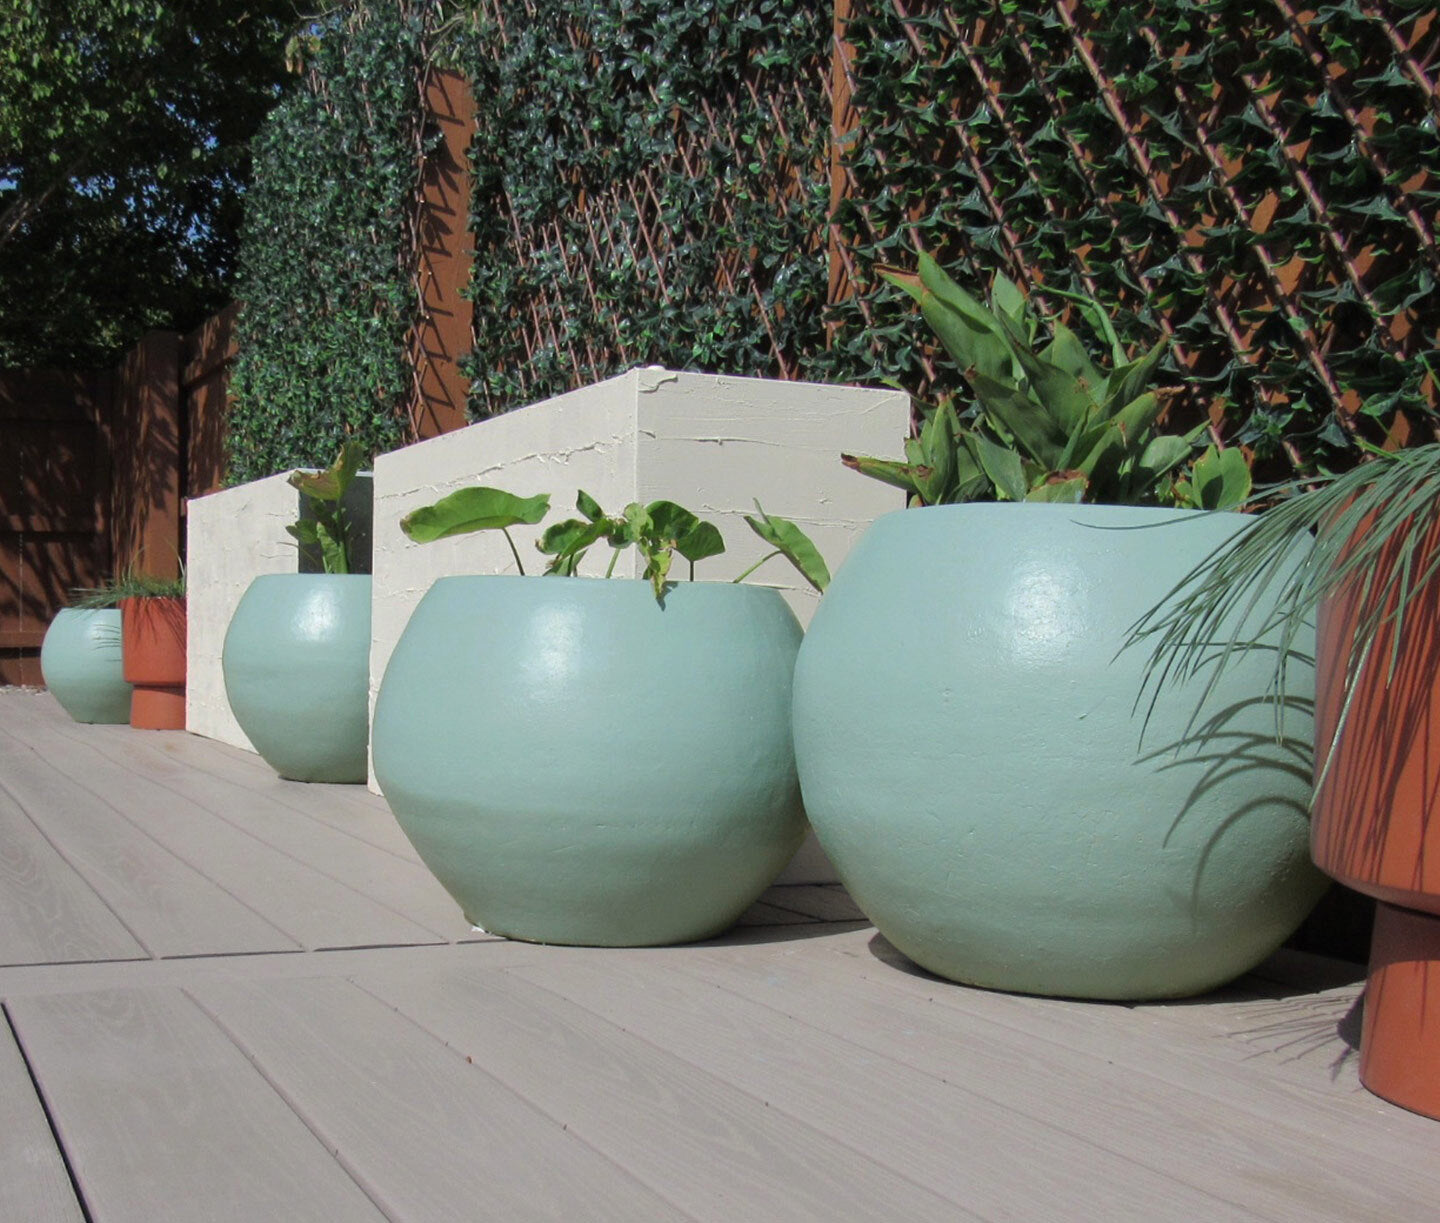 We’ve got tons of exterior paint ideas: add color to outdoor accents like pots, planters and fencing. These pots were painted with Make Waves from Clare.